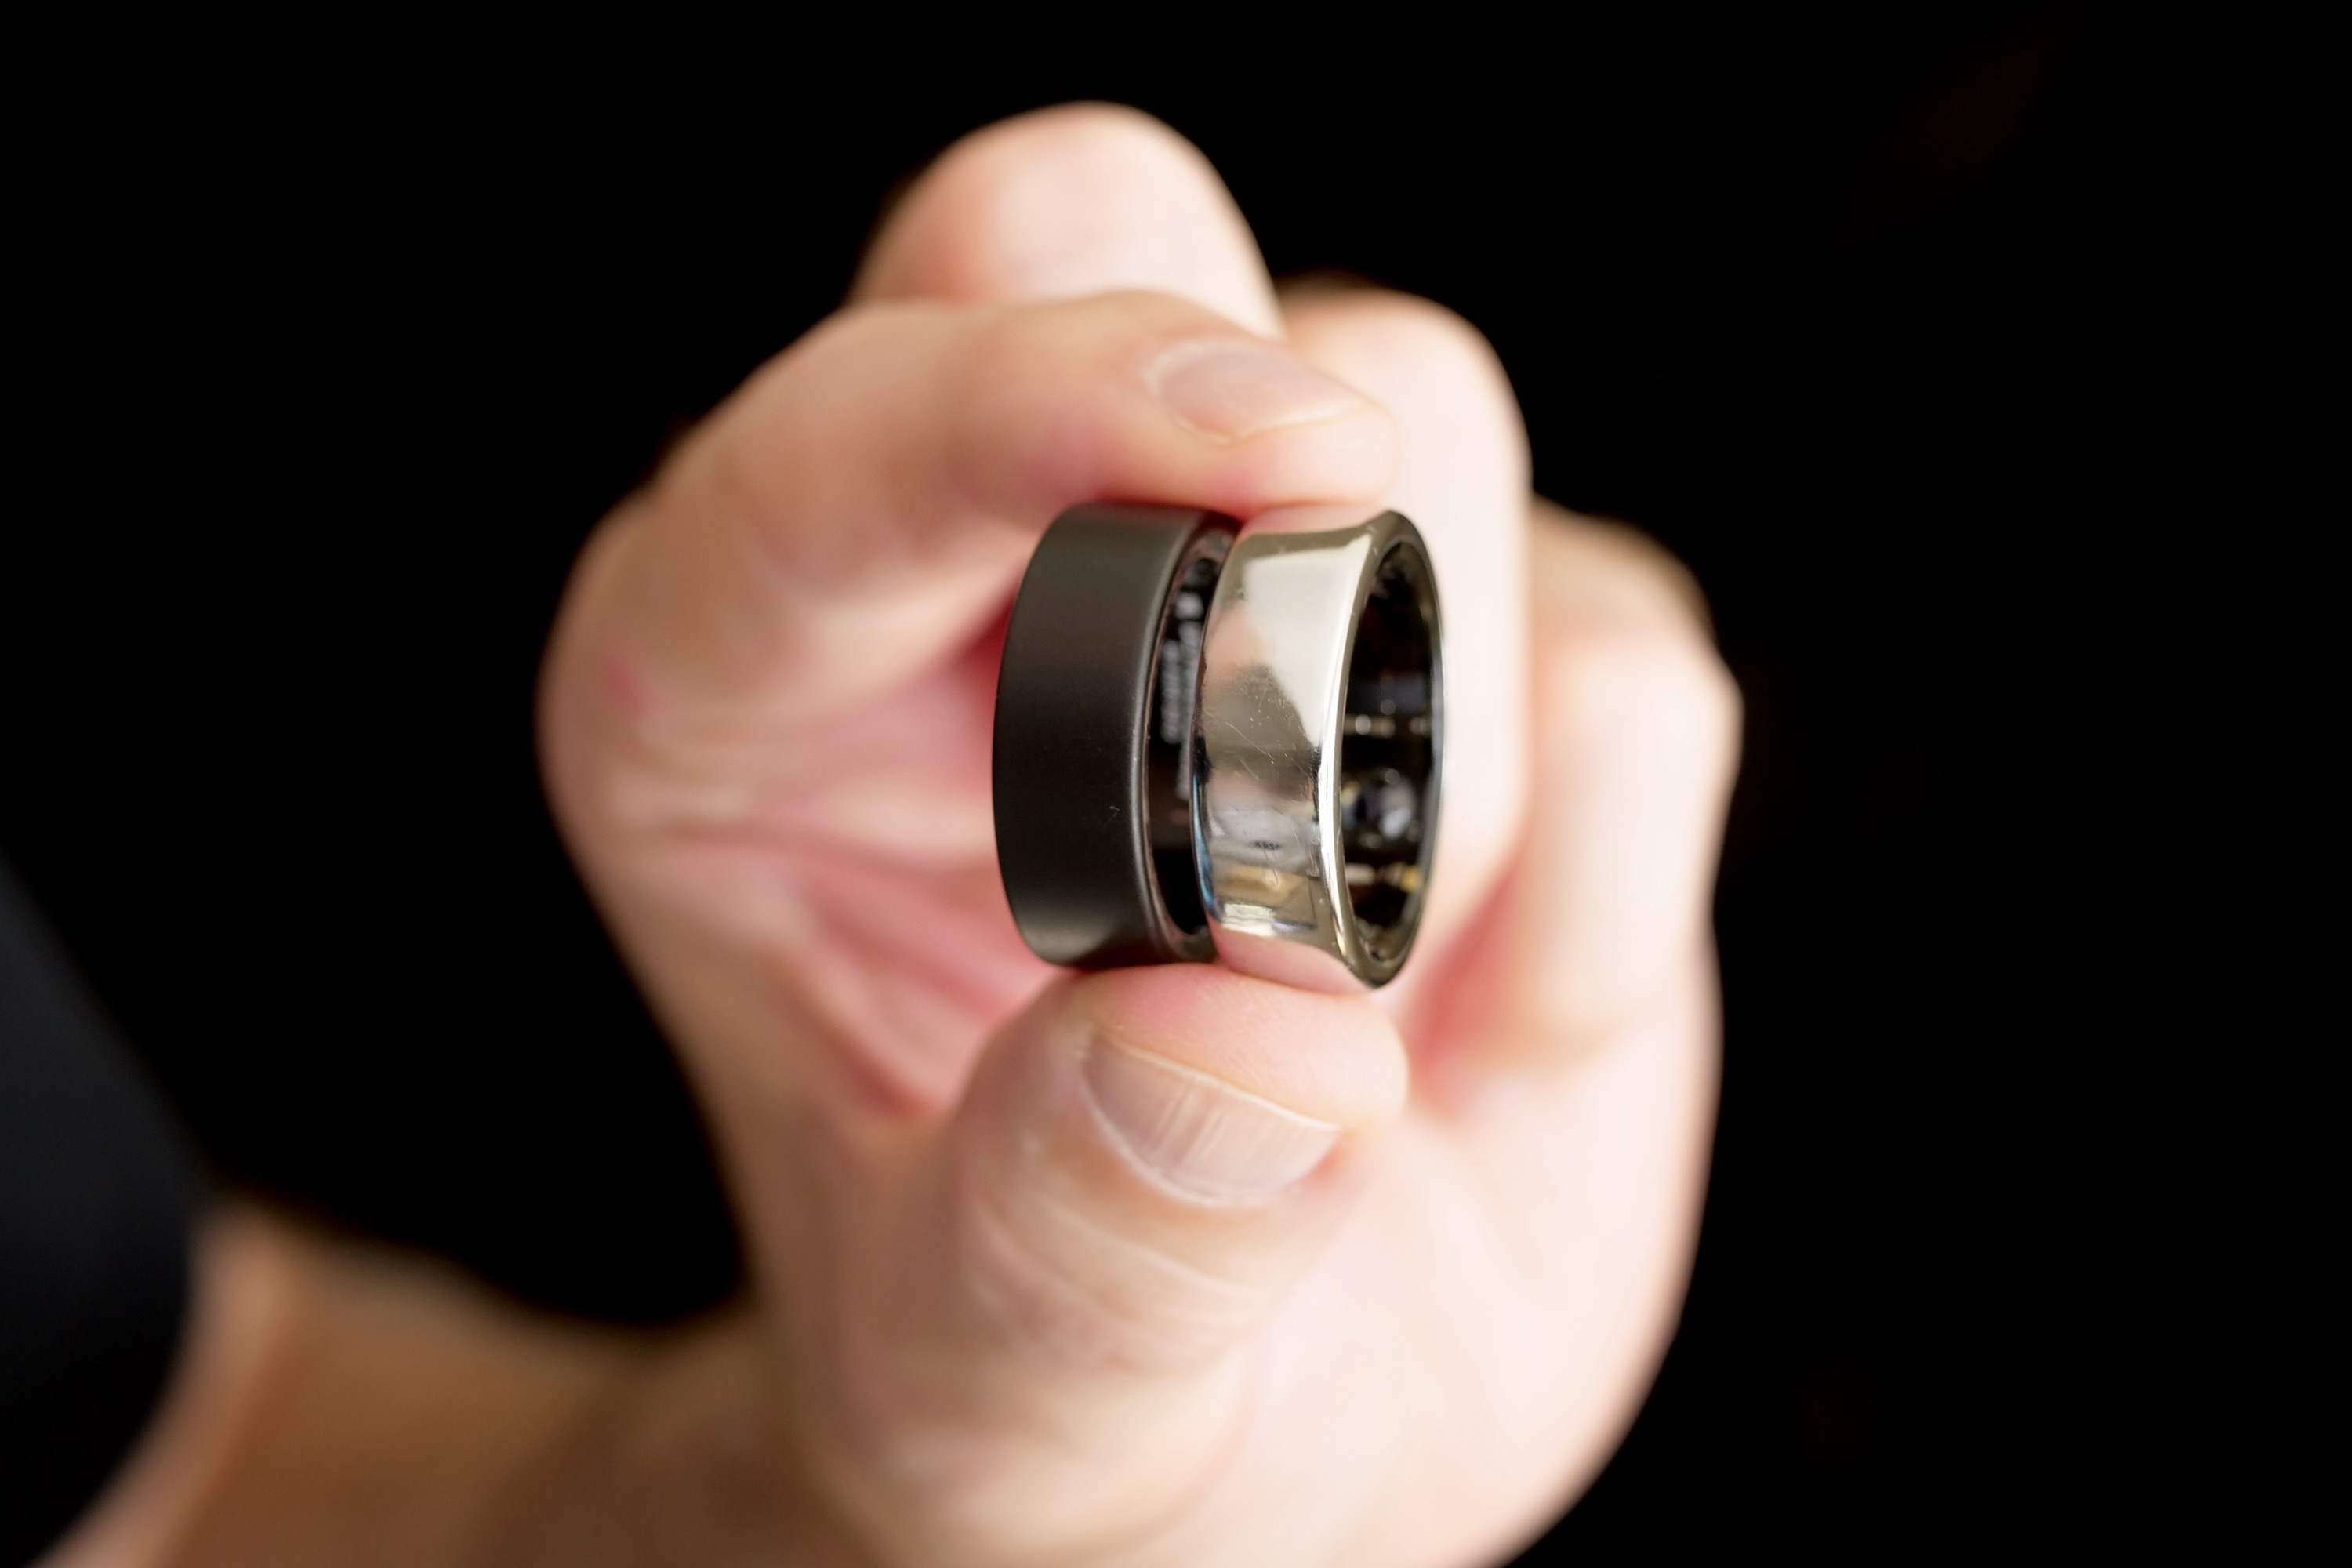 Forget Your Smartwatch, I'm Wearing A Smarty Ring